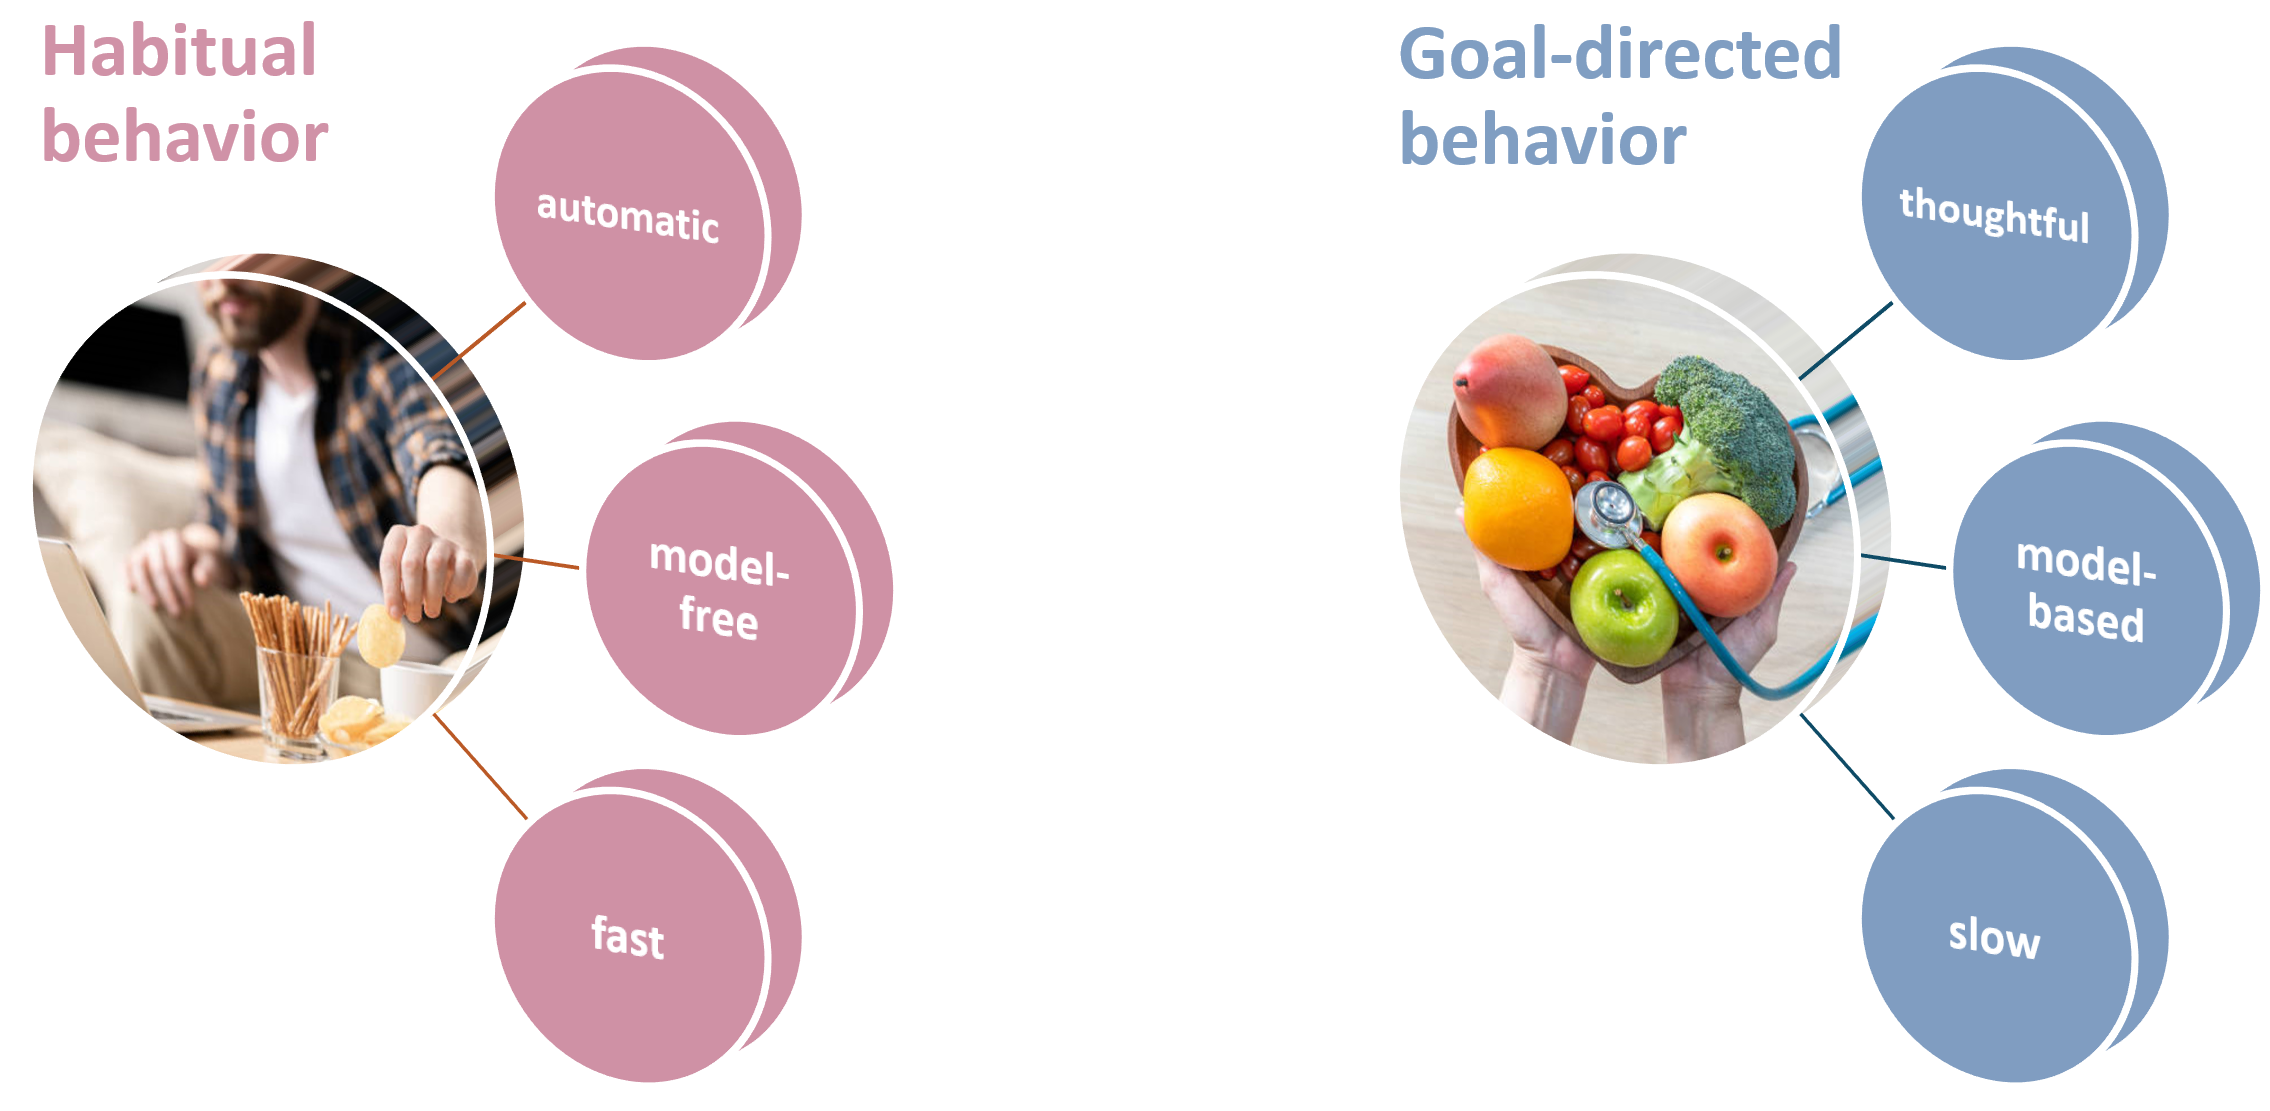 Diagrams showing features of habitual behavior (e.g., eating snack when focusing on work) and goal-directed behavior (planning a meal to lose weight). Left: habitual behavior with features like automatic, model-free, and fast; Right: goal-directed behavior with features like thoughtful, model-based, and slow. 